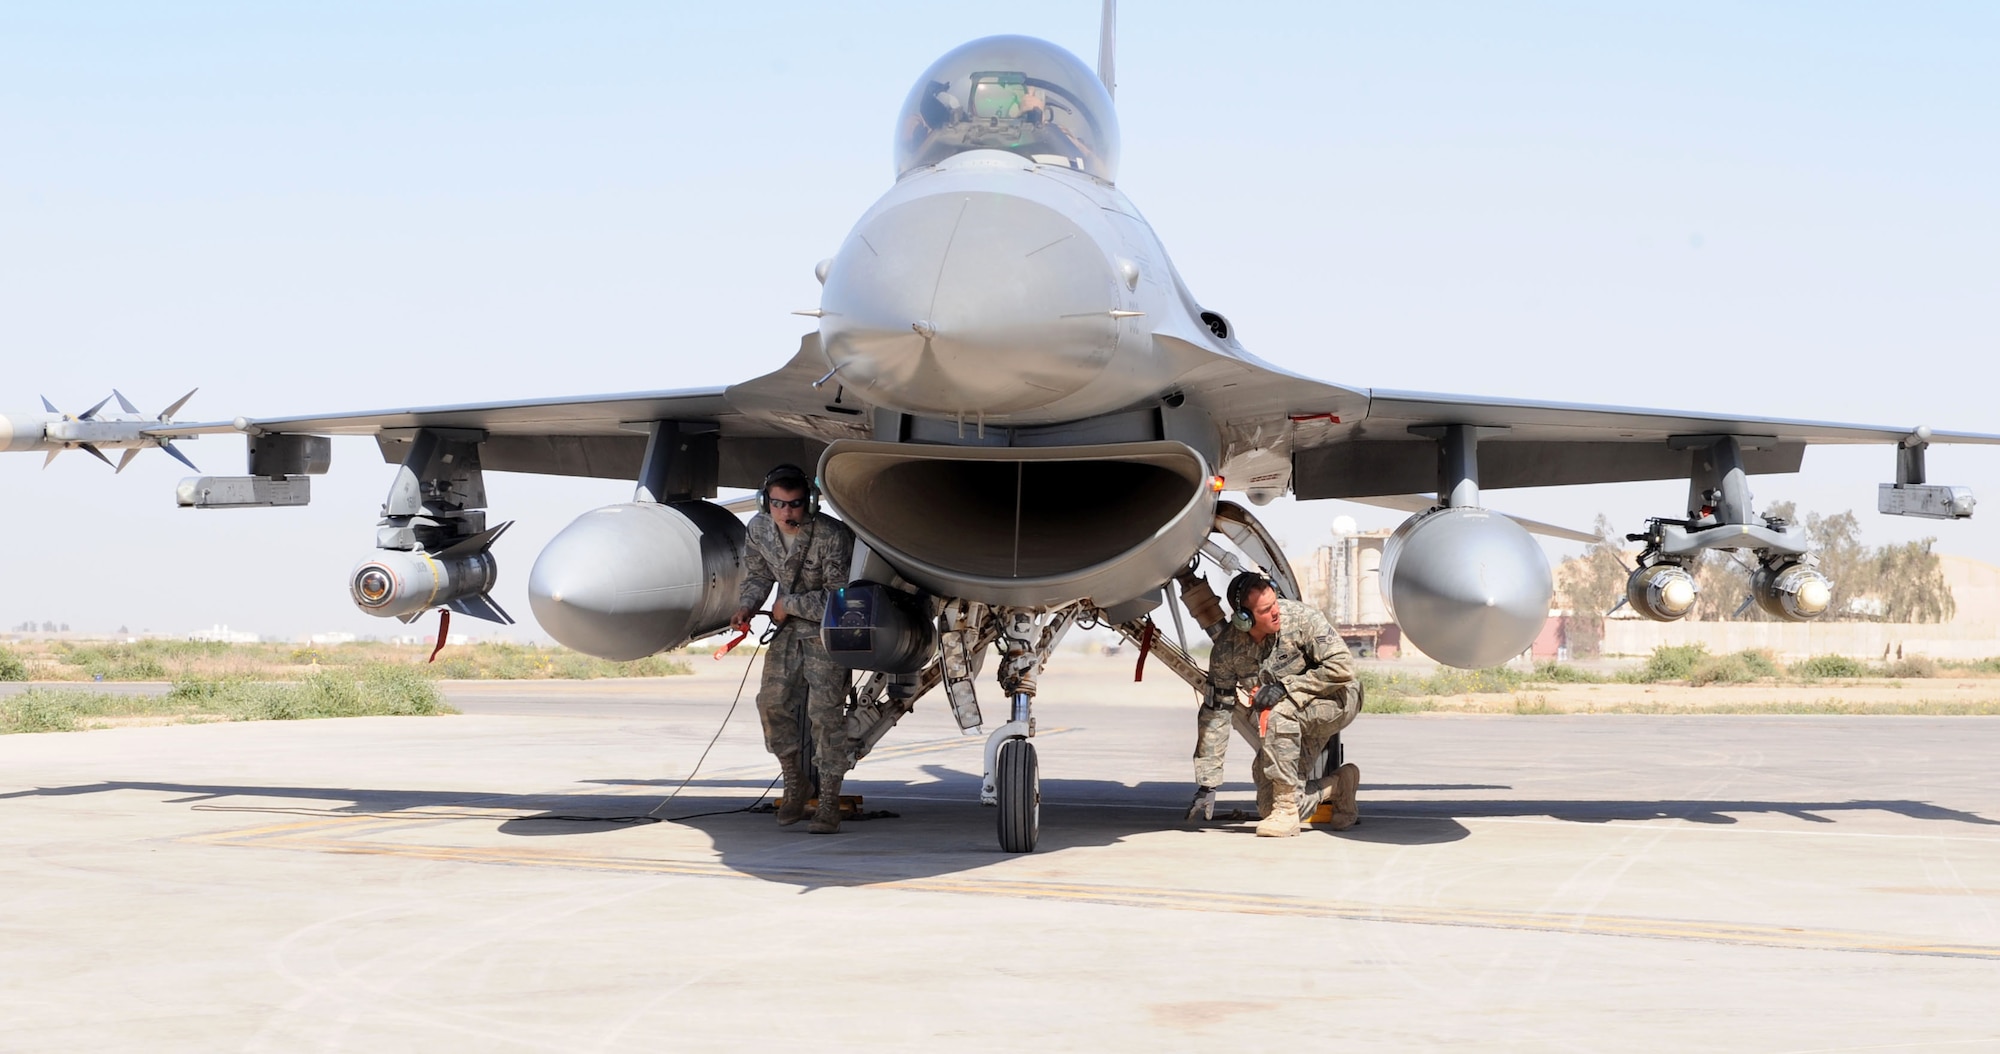 JOINT BASE BALAD, Iraq — Airman 1st Class Thomas Shepard, 332nd Expeditionary Aircraft Maintenance Squadron assistant dedicated crew chief, and Senior Airman David McAdams, 332nd EAMXS avionics technician journeyman, inspect an F-16 Fighting Falcon after it landed here recently. This F-16 became the first 40 block to surpass the 7,000-hour milestone. Black refers to the variant of the jet. Airman Shepard, a native of Rockhill, S.C., and Airman McAdams, a native of Huntsville Ala., are both deployed here from Hill Air Force Base, Utah. (U.S. Air Force photo/Senior Airman Tiffany Trojca)